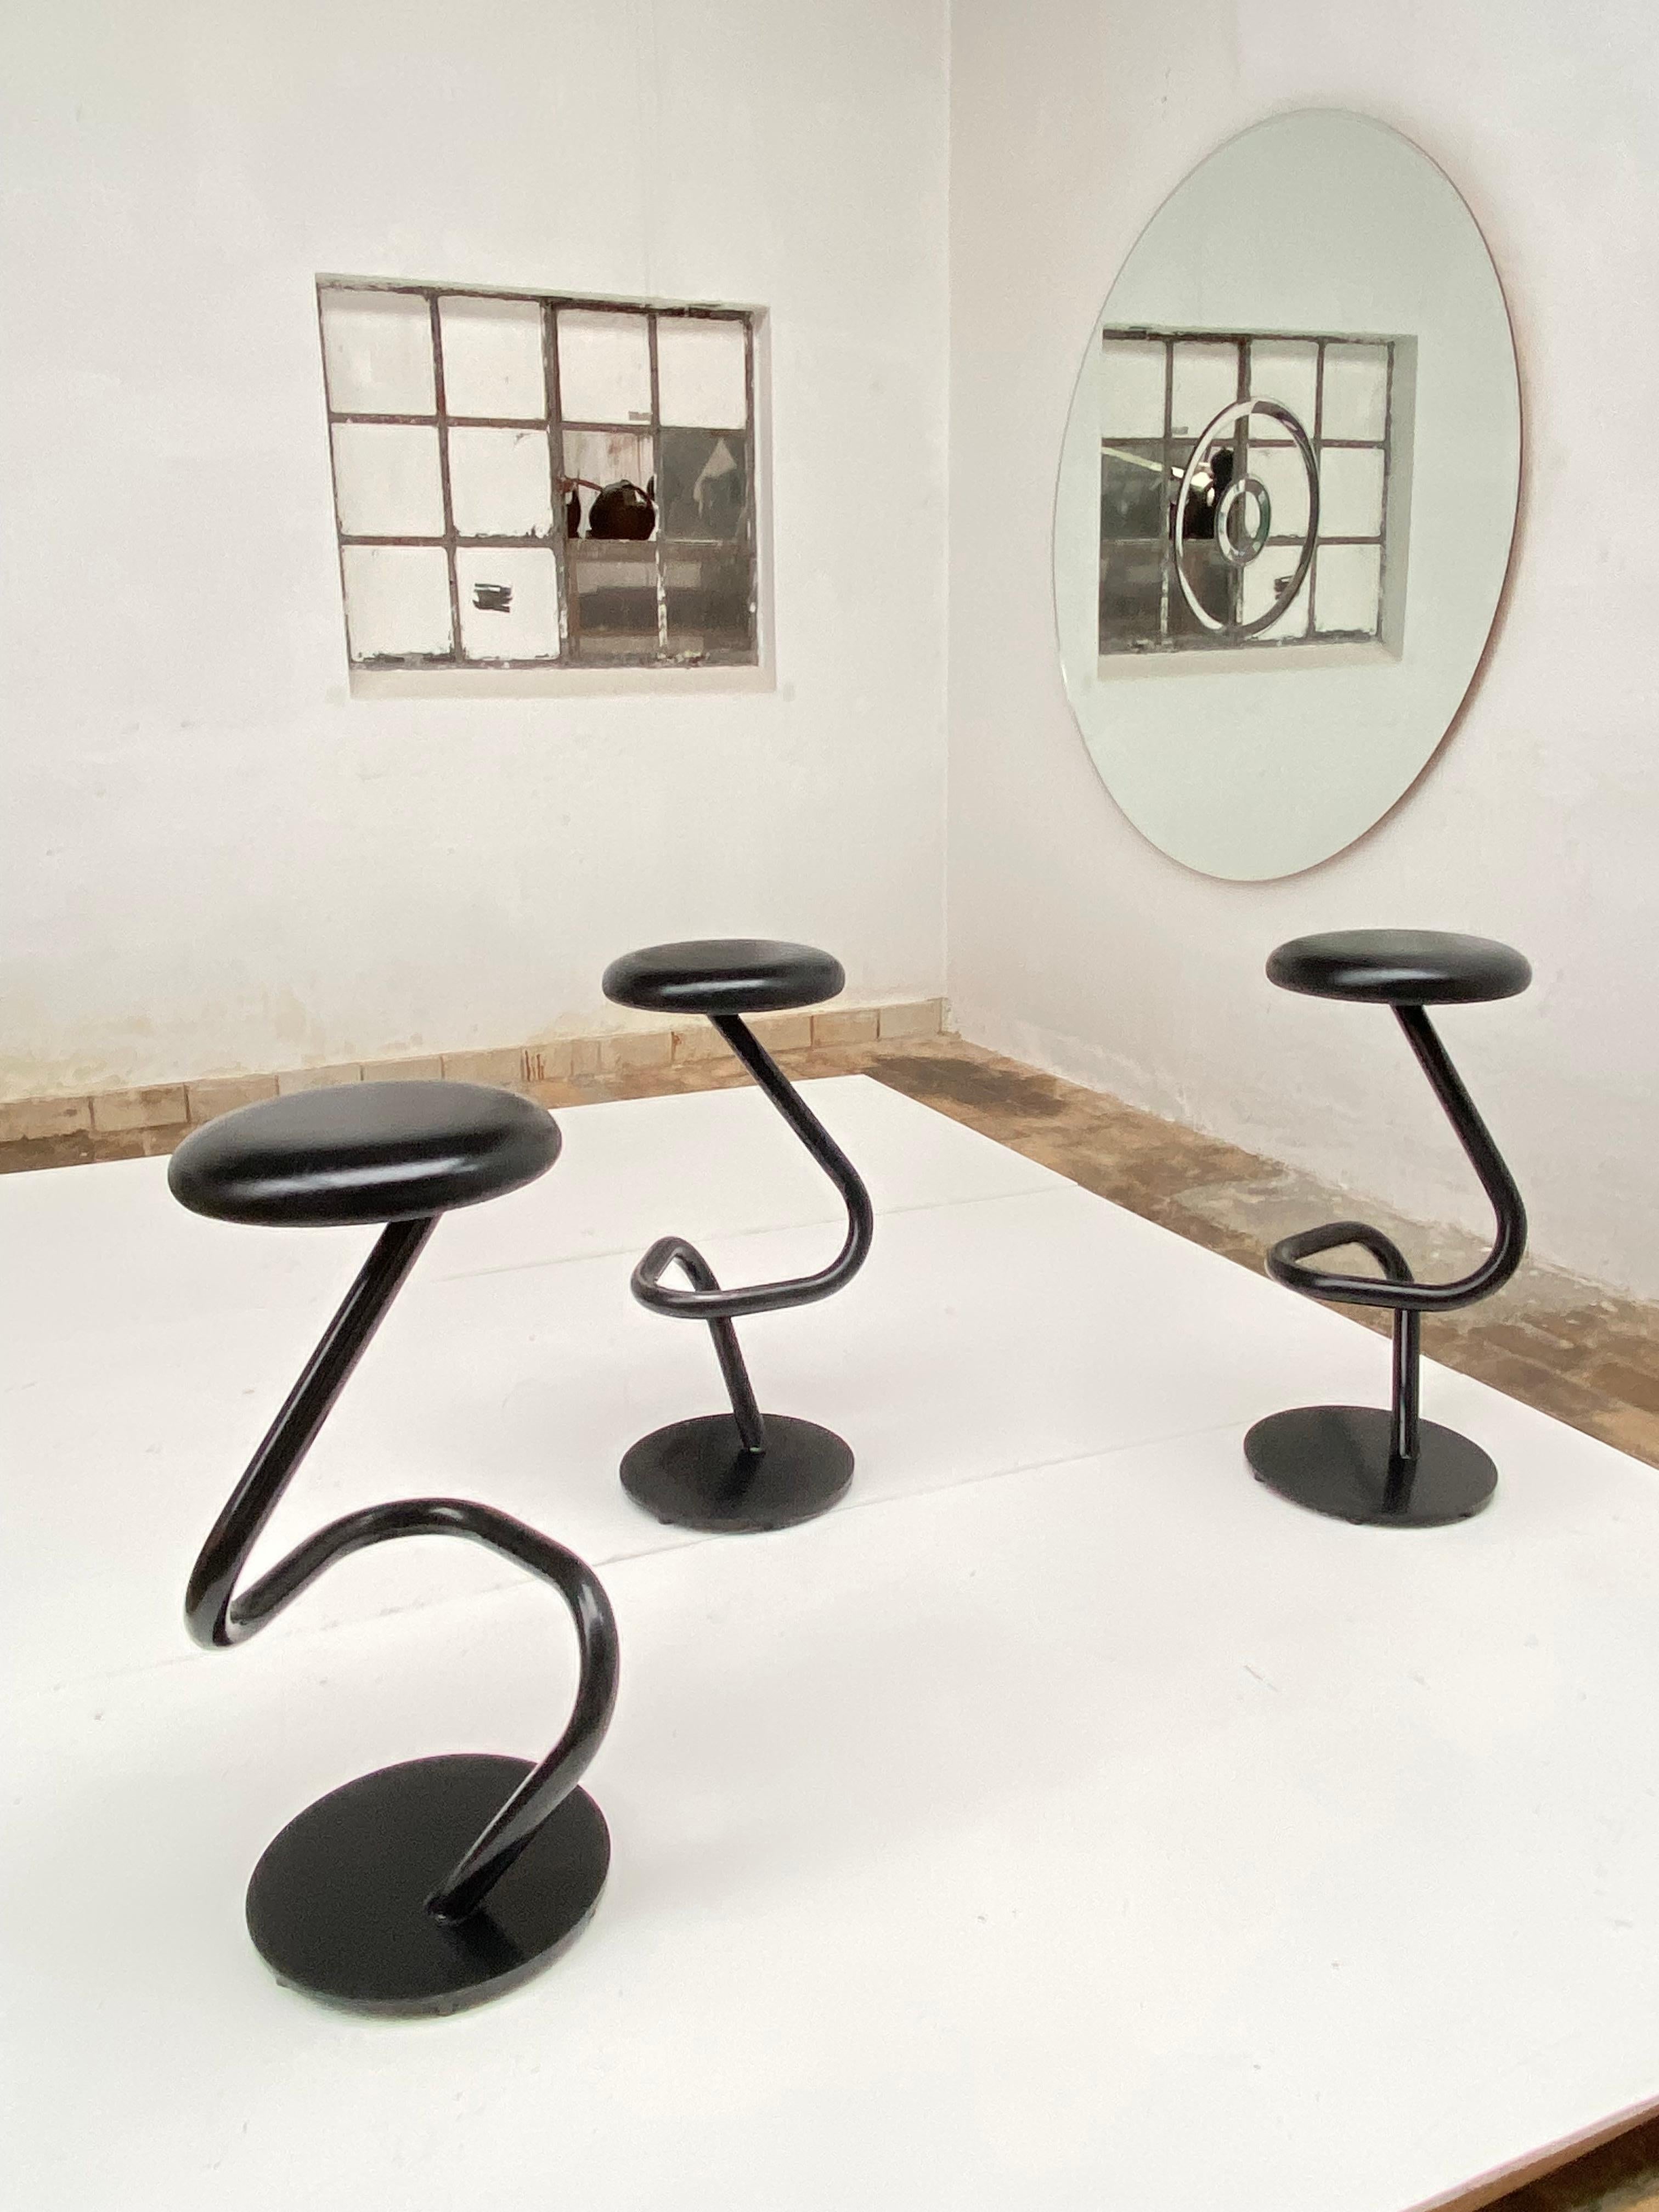 3 Sturdy Swiss Made Heavy Quality Black Leather & Steel High Bar Stools, 1980s For Sale 2